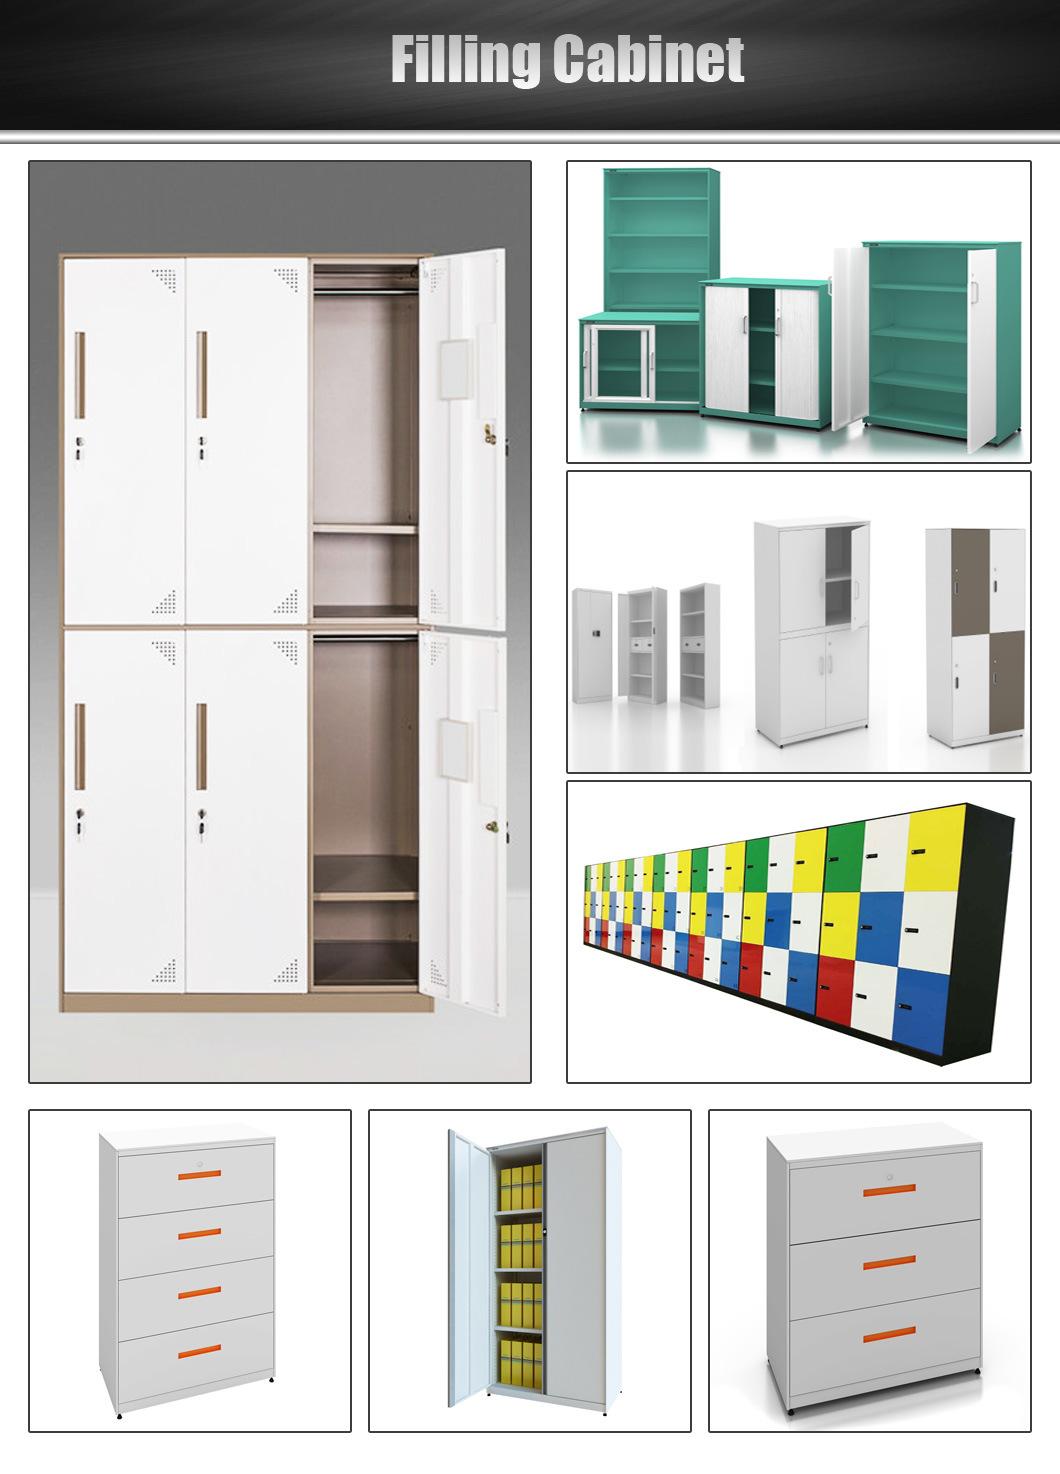 Ample Supply Work Storage Cabinets with Environmentally-Friendly Materials